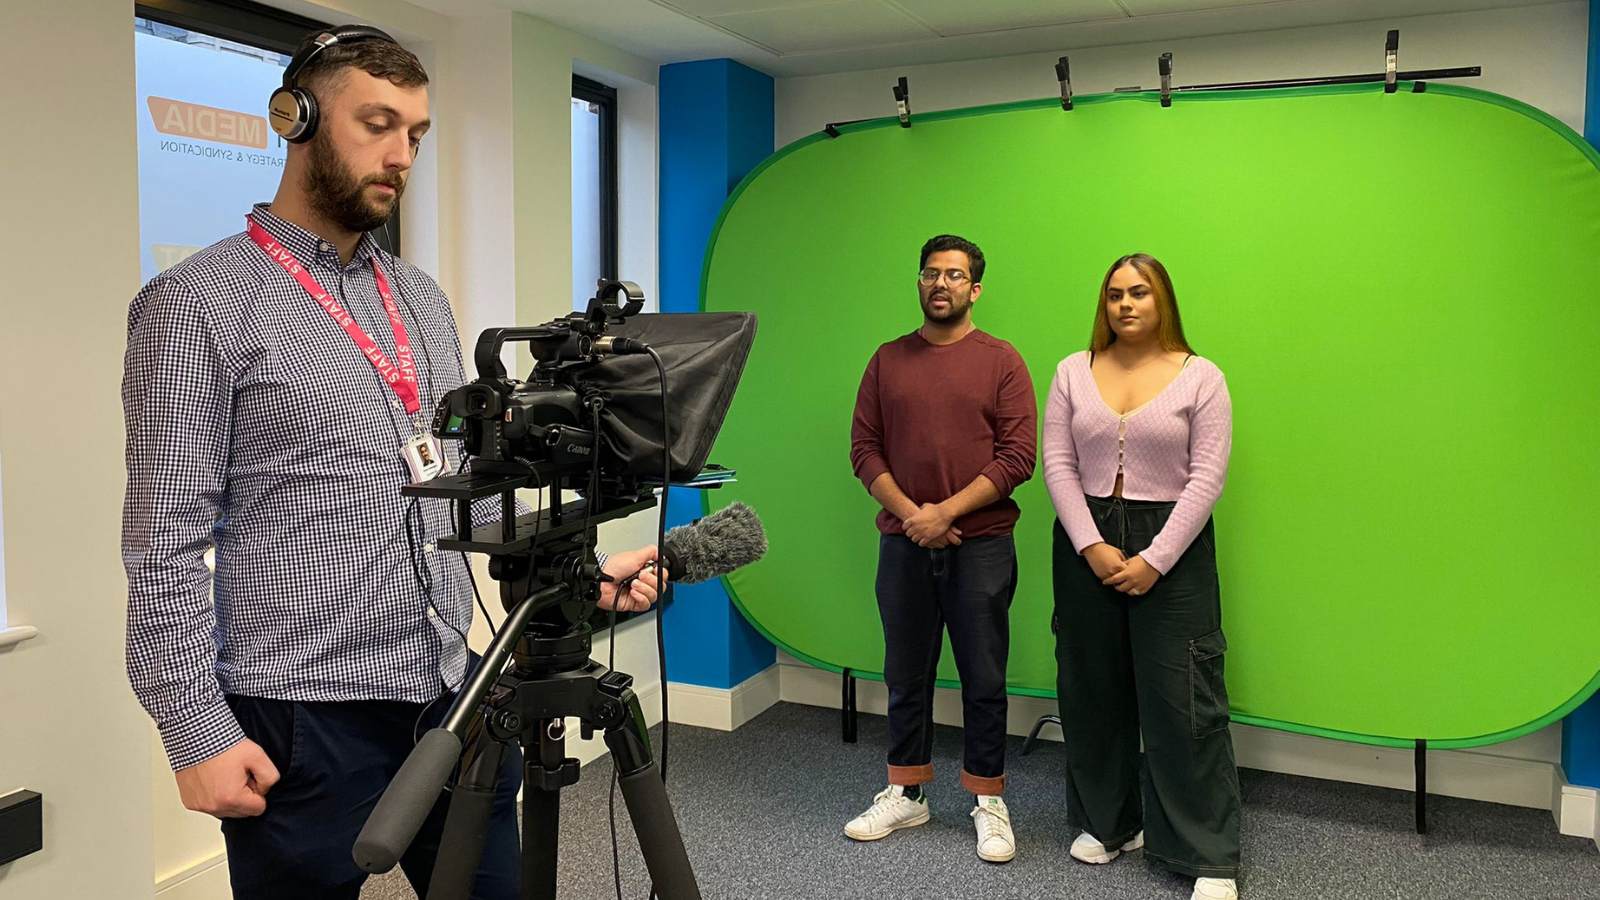 Trainees and a tutor doing a news bulletin exercise in front of a camera and autocue and with a green screen backdrop 